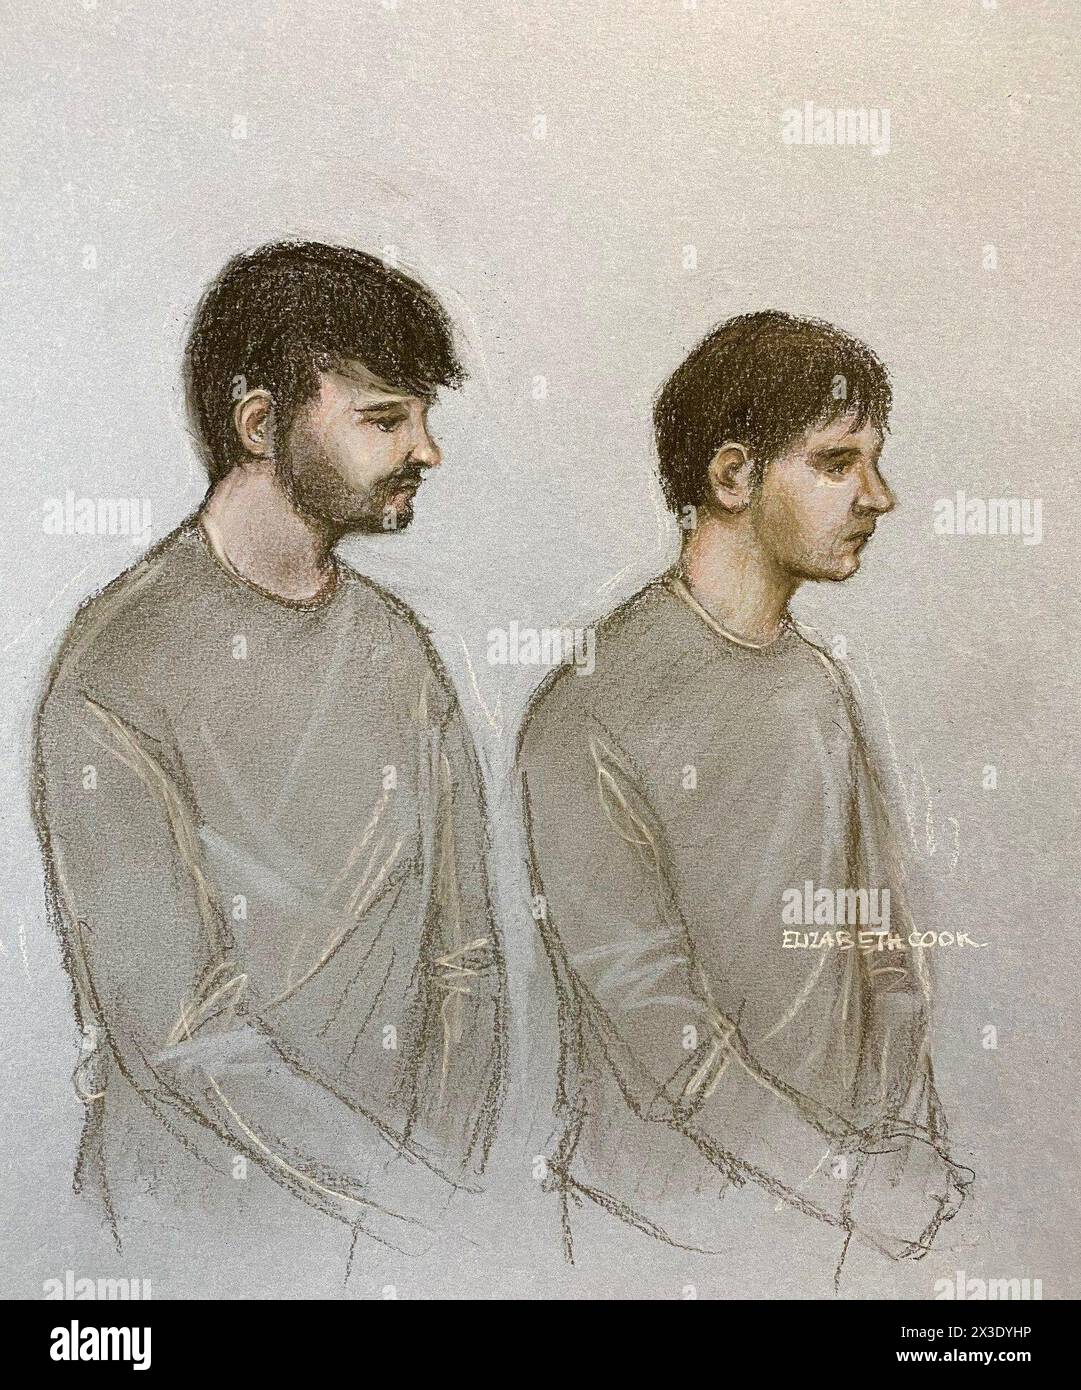 Court artist sketch by Elizabeth Cook of Dmitrijus Paulauska (left) and Jake Reeves appearing at Westminster Magistrates' Court, central London, who along with Paul English and Nii Mensah have been charged in connection with the case of a London arson plot. British man, Dylan Earl is accused of masterminding an arson plot on London businesses after allegedly being recruited as a Russian spy. Earl has been charged under the National Security Act 2023 - the first case to involve alleged offences under the new legislation. Issue date: Friday April 26, 2024. Stock Photo